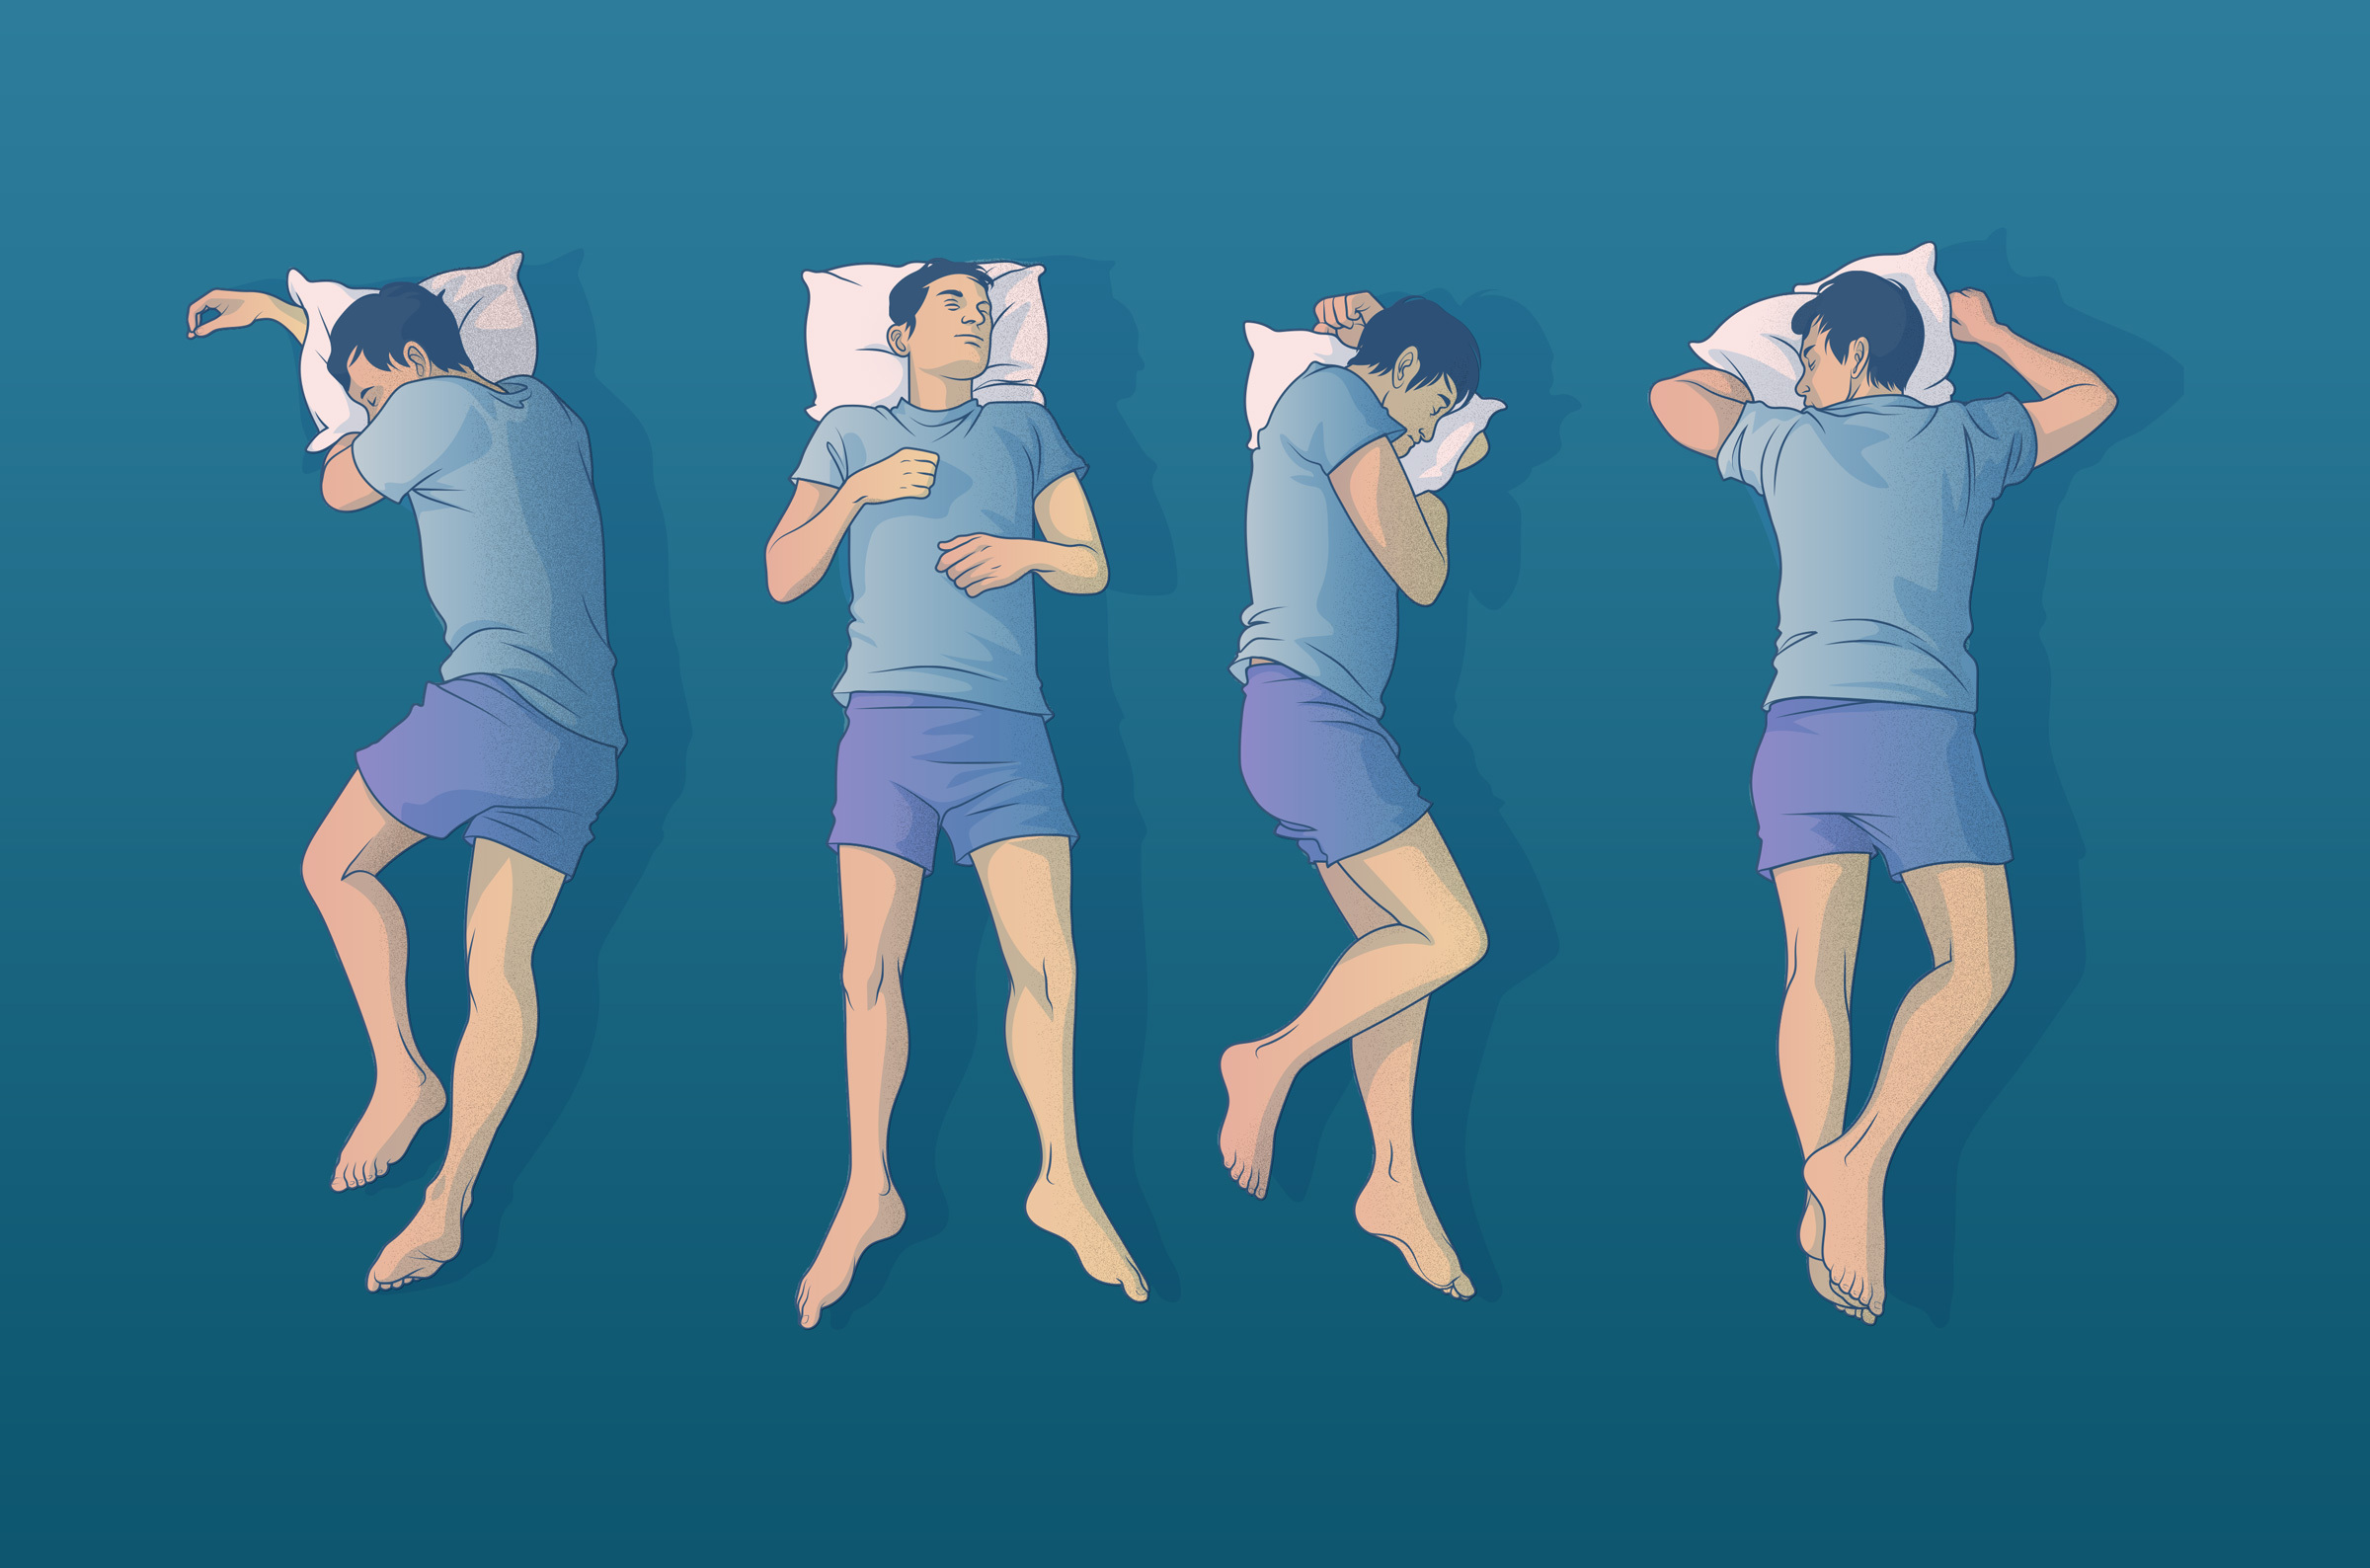 How to choose the best sleeping position, and why it matters